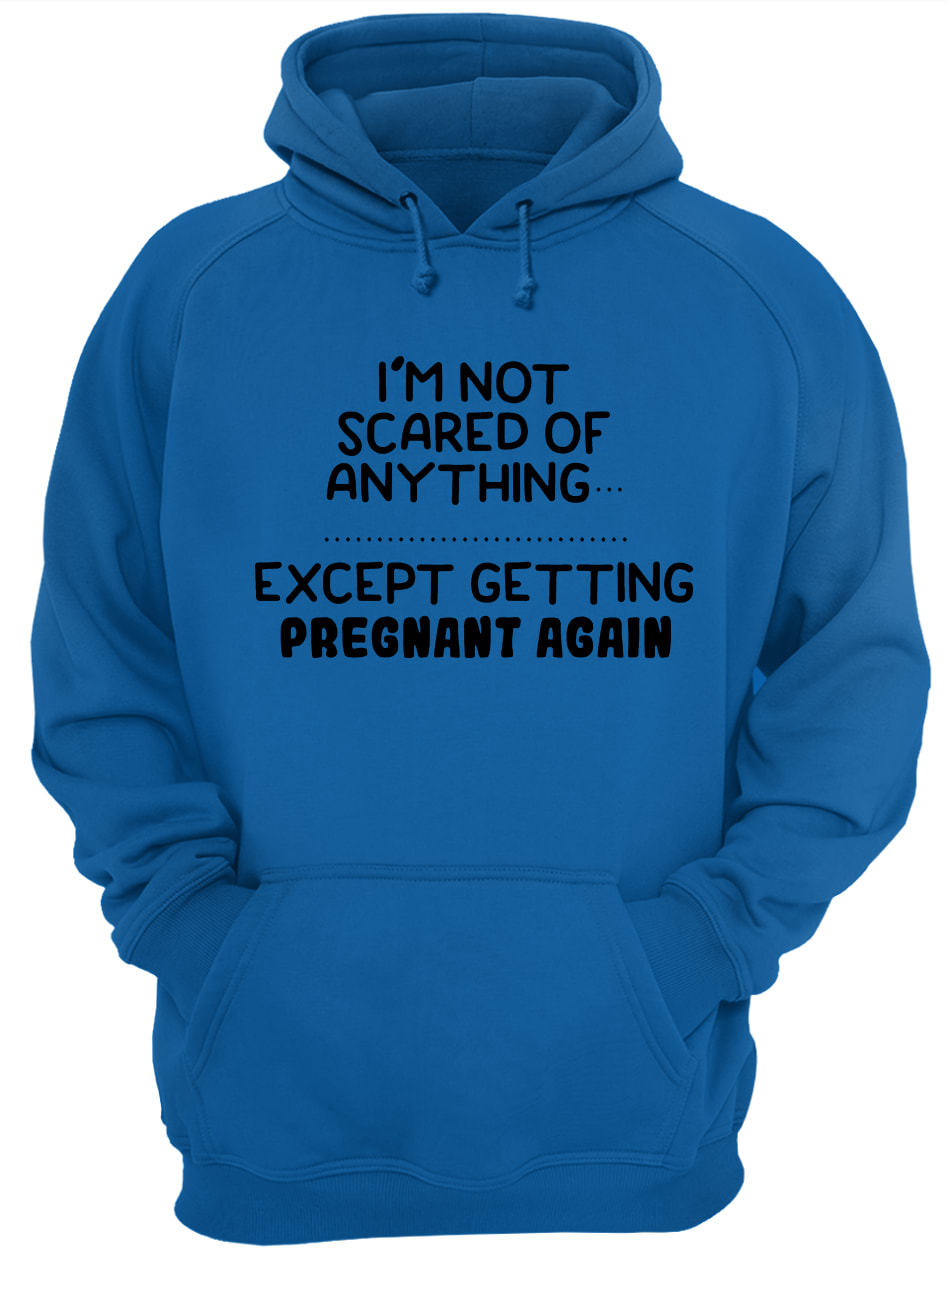 I'm not scared of anything except getting pregnant again hoodie